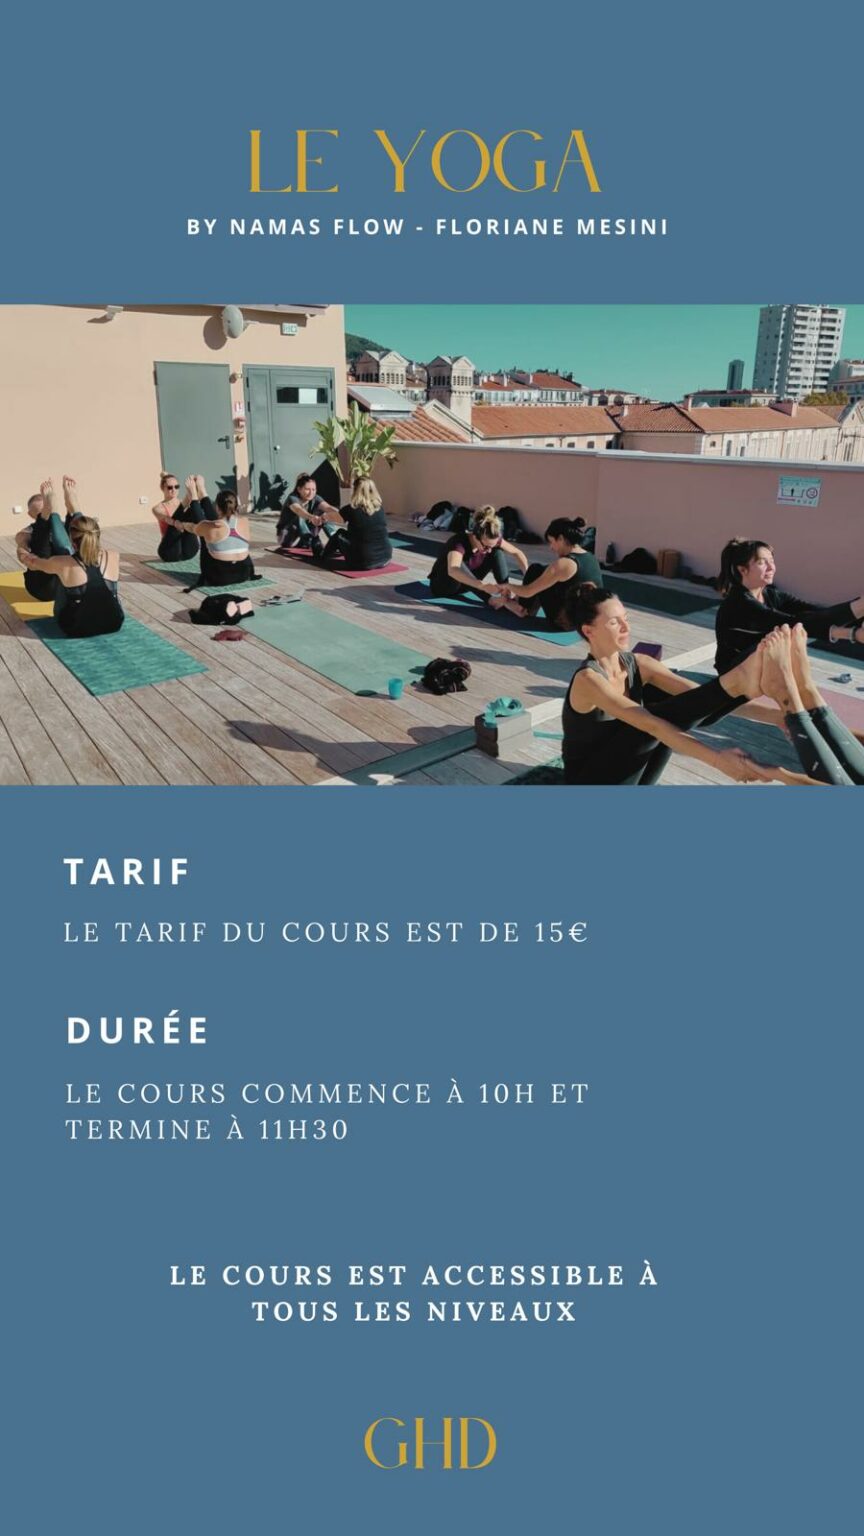 yoga-brunch-rooftop-grand-hotel-dauphine-toulon-2